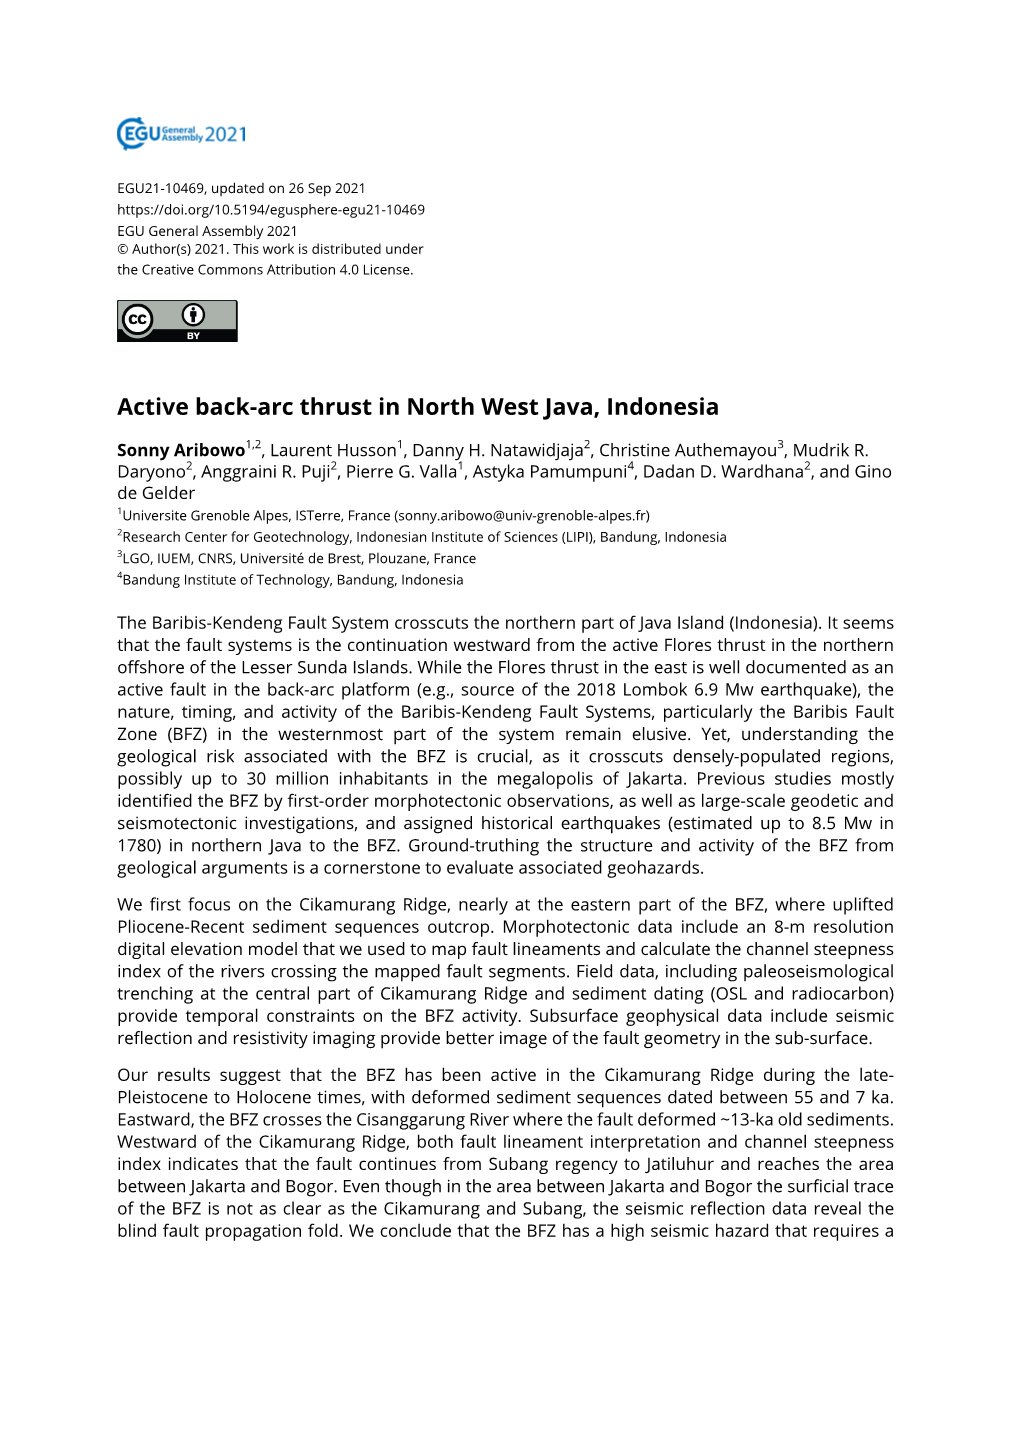 Active Back-Arc Thrust in North West Java, Indonesia